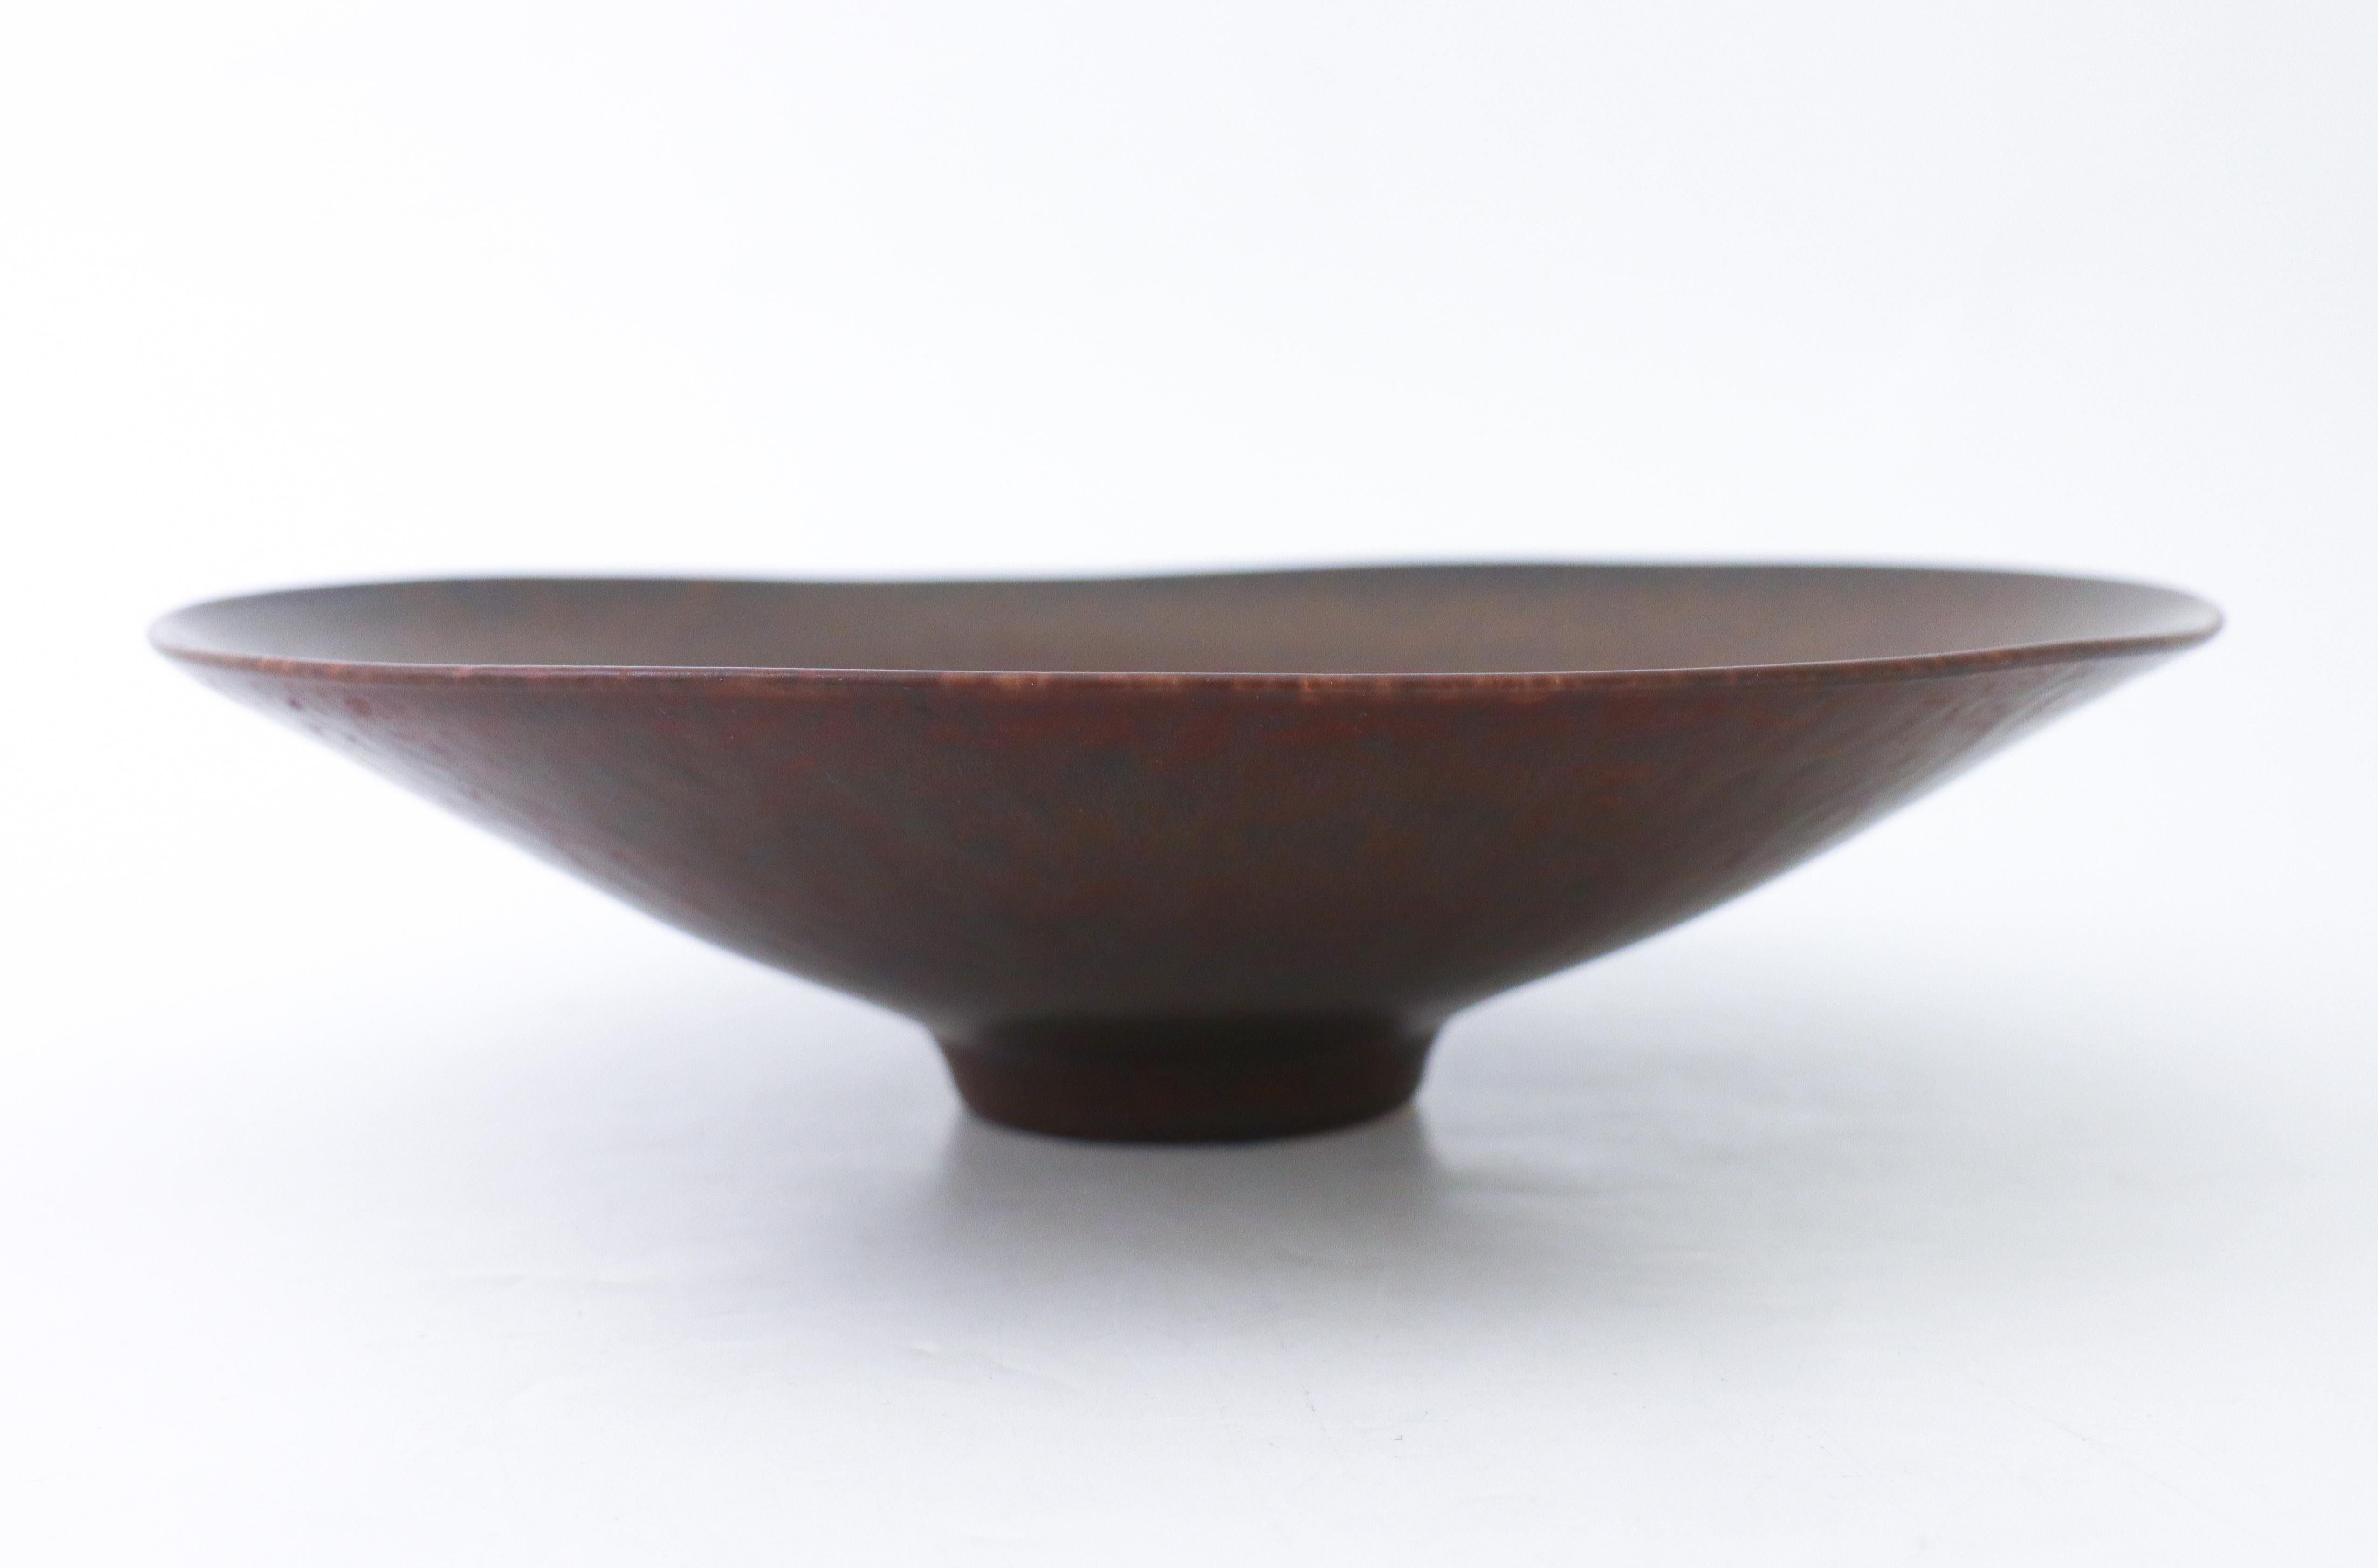 A round ceramic bowl designed by Carl-Harry Stålhane at Rörstrand with a lovely brown har-fur glaze, the bowl is 29 cm (11.6